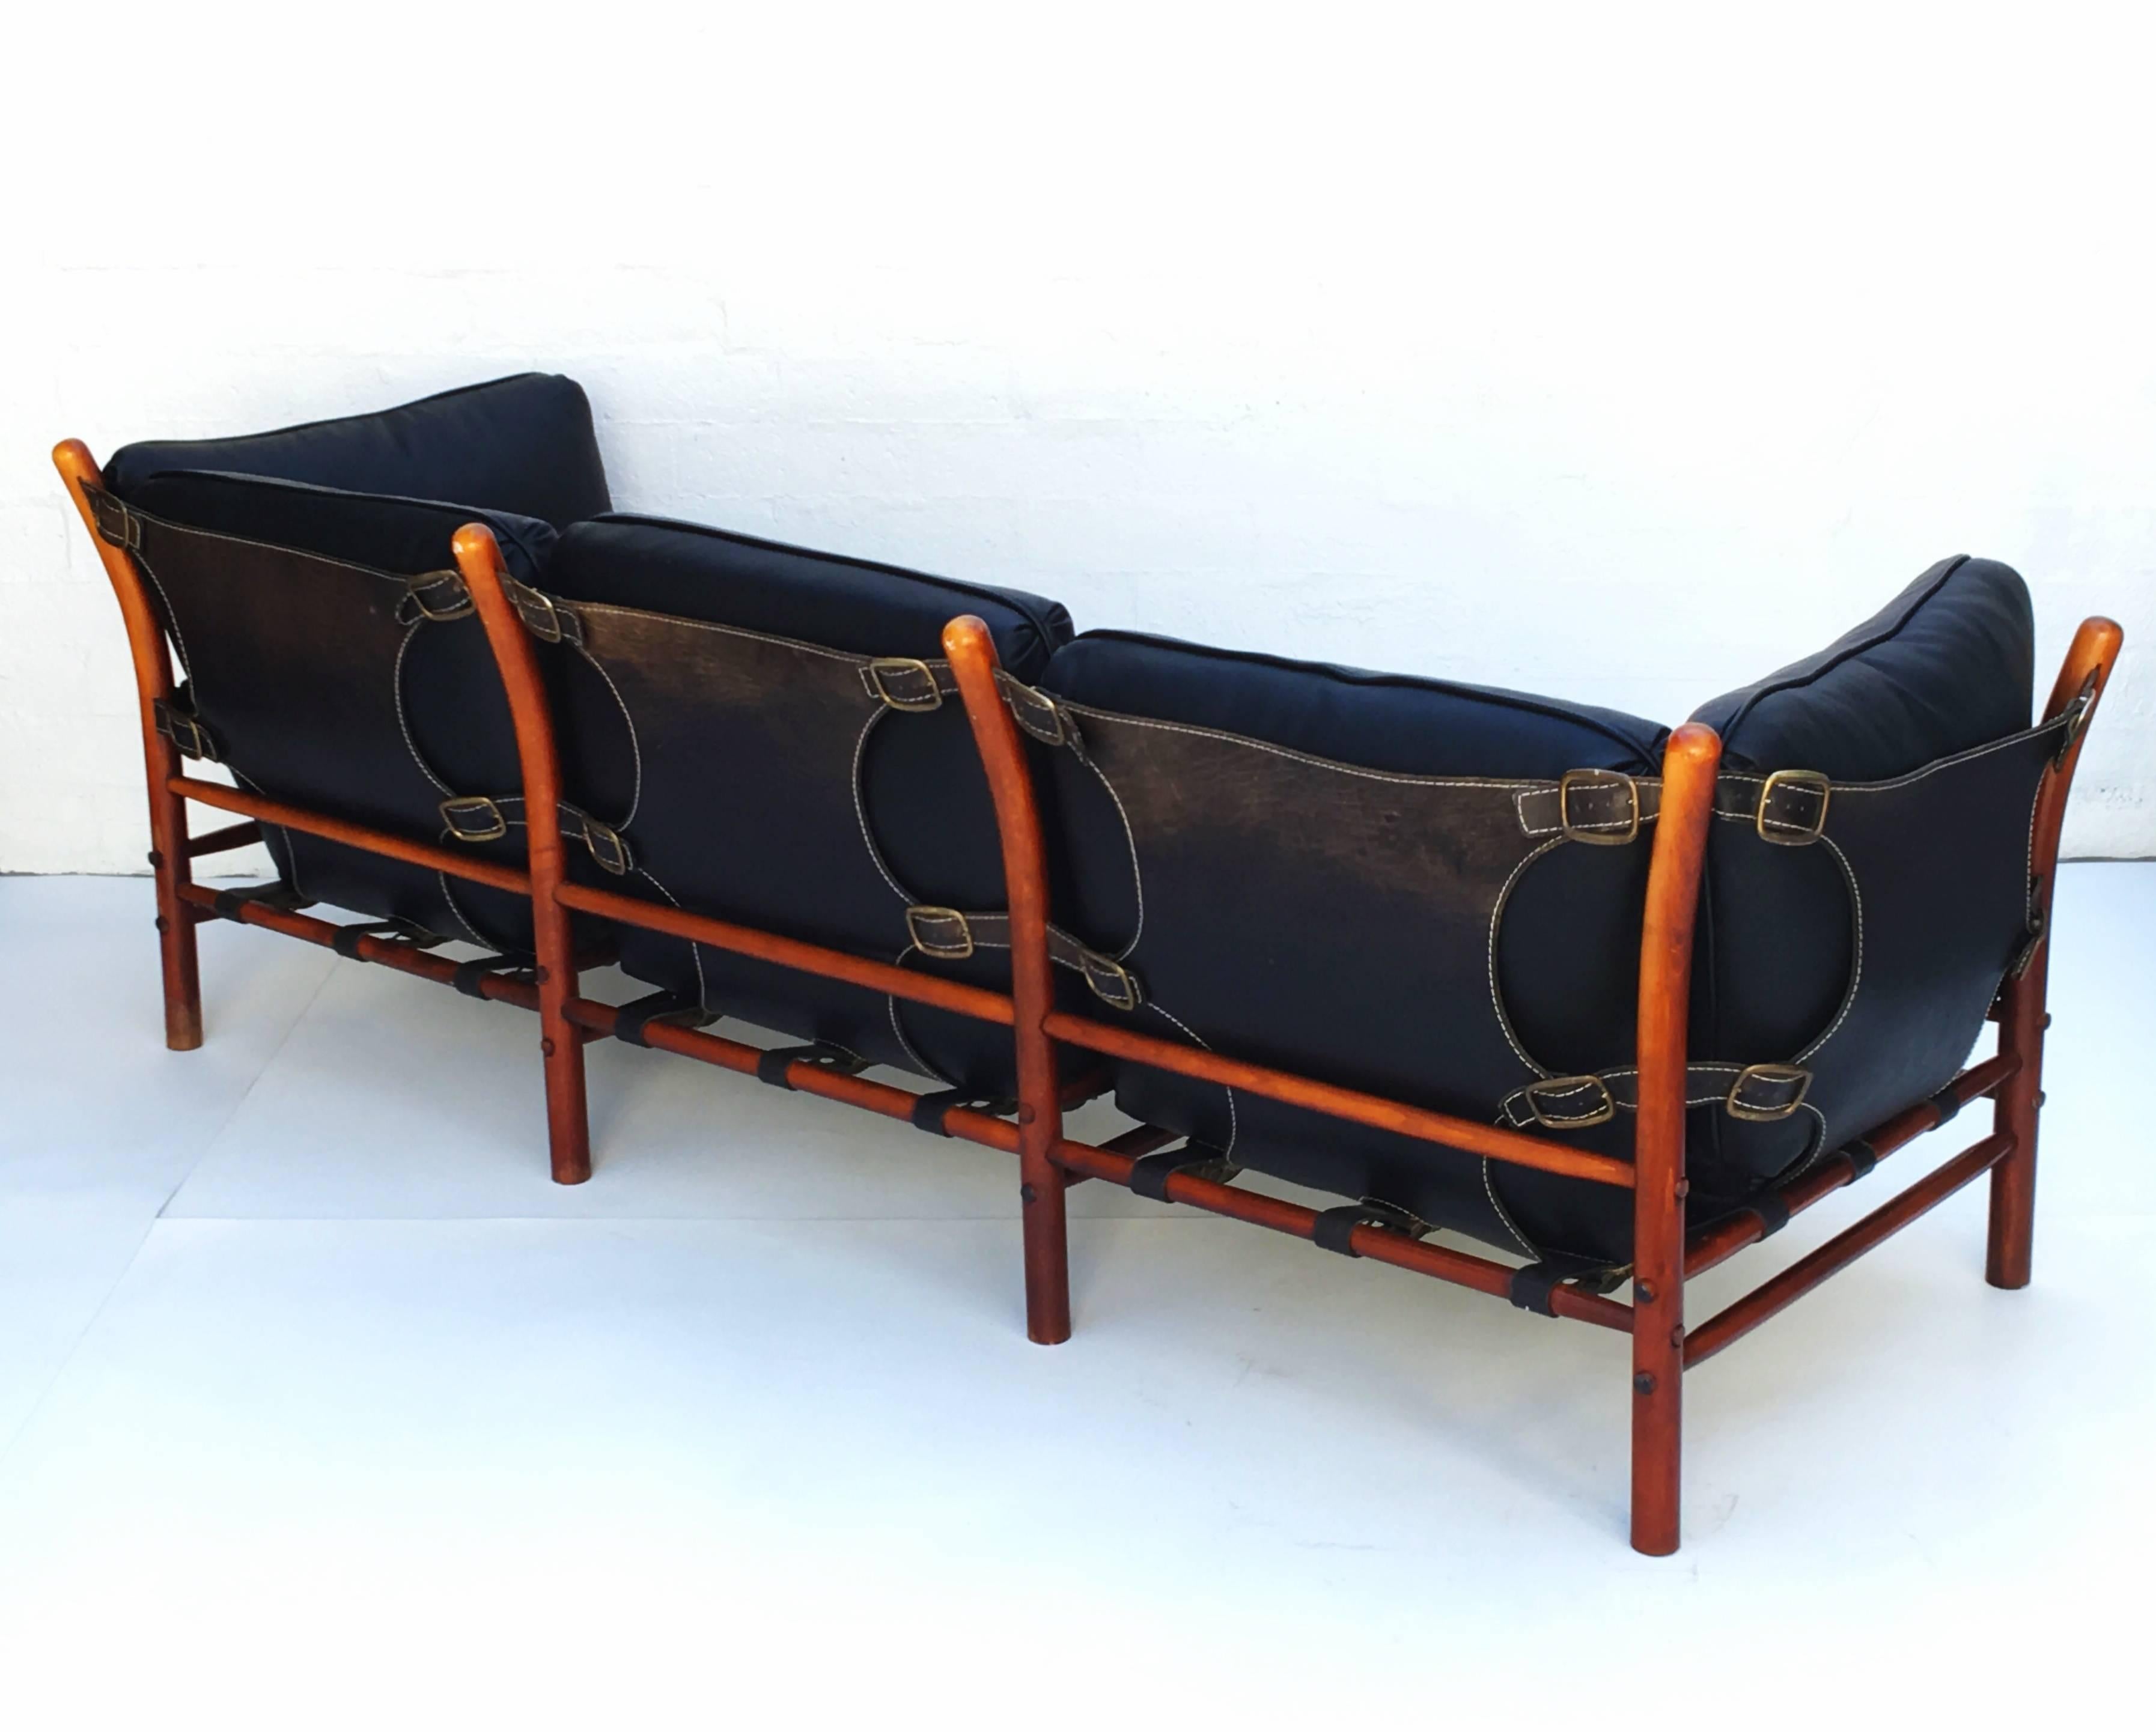 A beautiful black leather and dark beechwood design by Arne Norell AB in Aneby, Sweden.
Thick black saddle leather sling support the newly reupholstered soft black leather cushions.